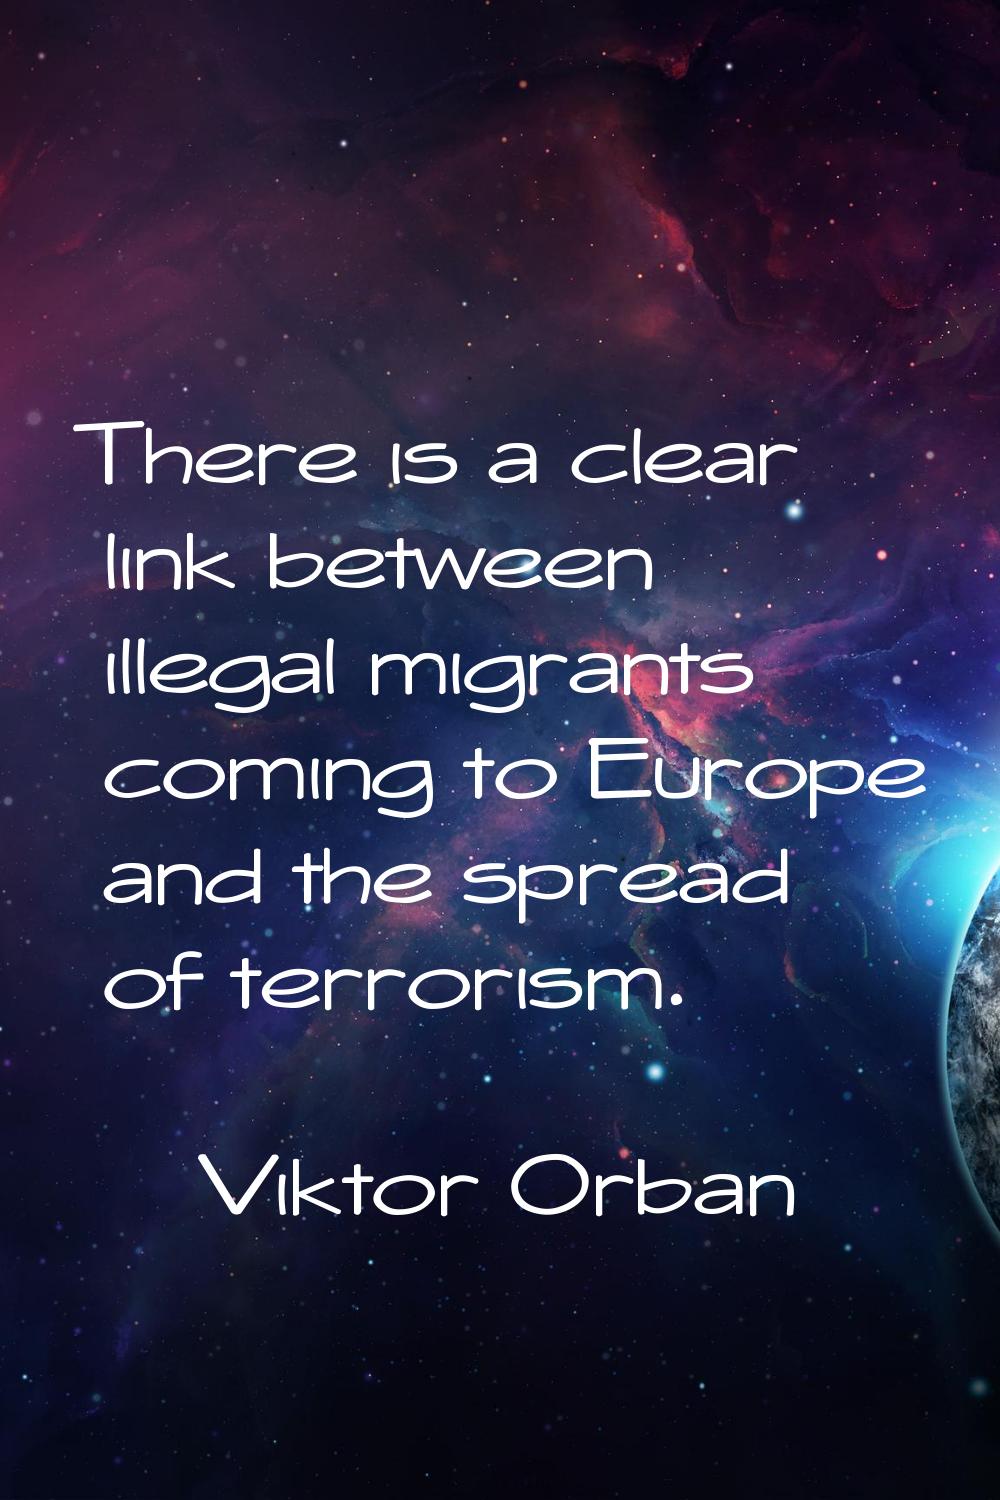 There is a clear link between illegal migrants coming to Europe and the spread of terrorism.